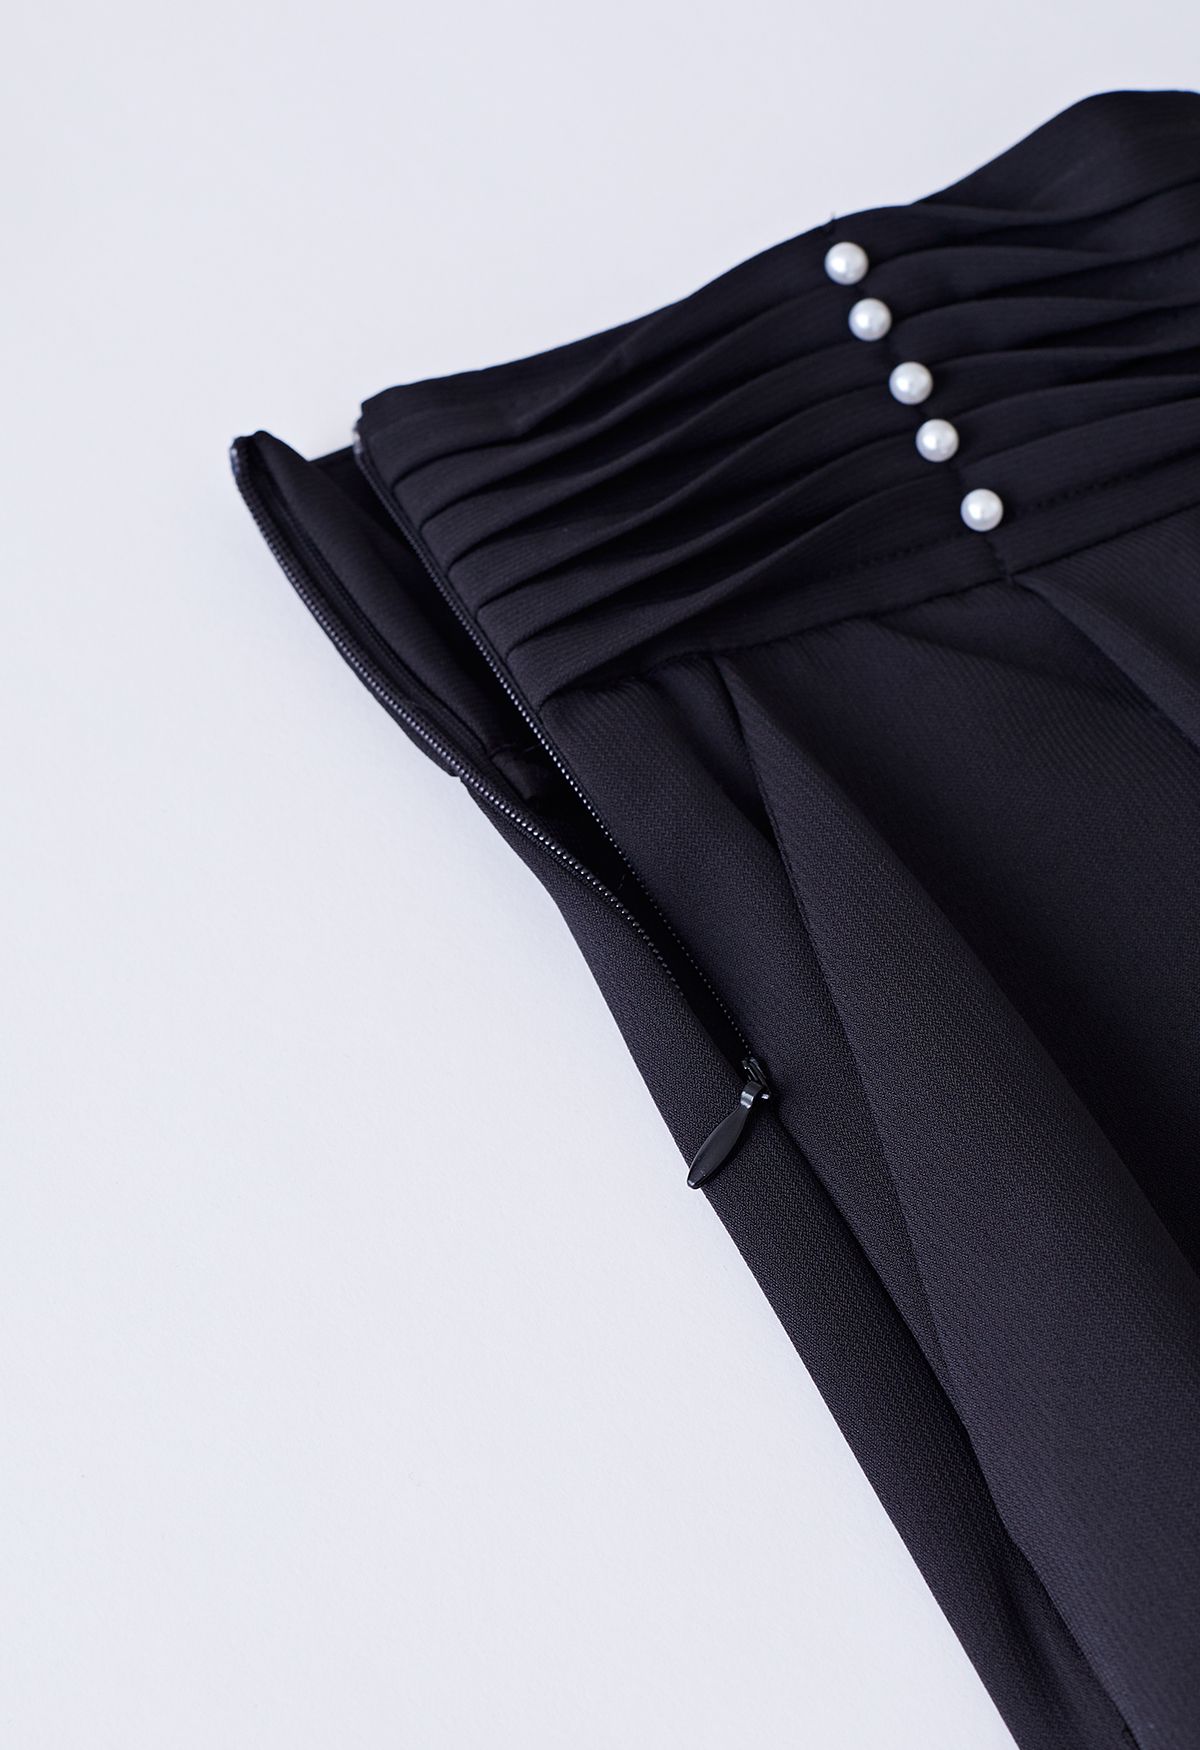 Pearly Pleated Waist Wide-Leg Pants in Black